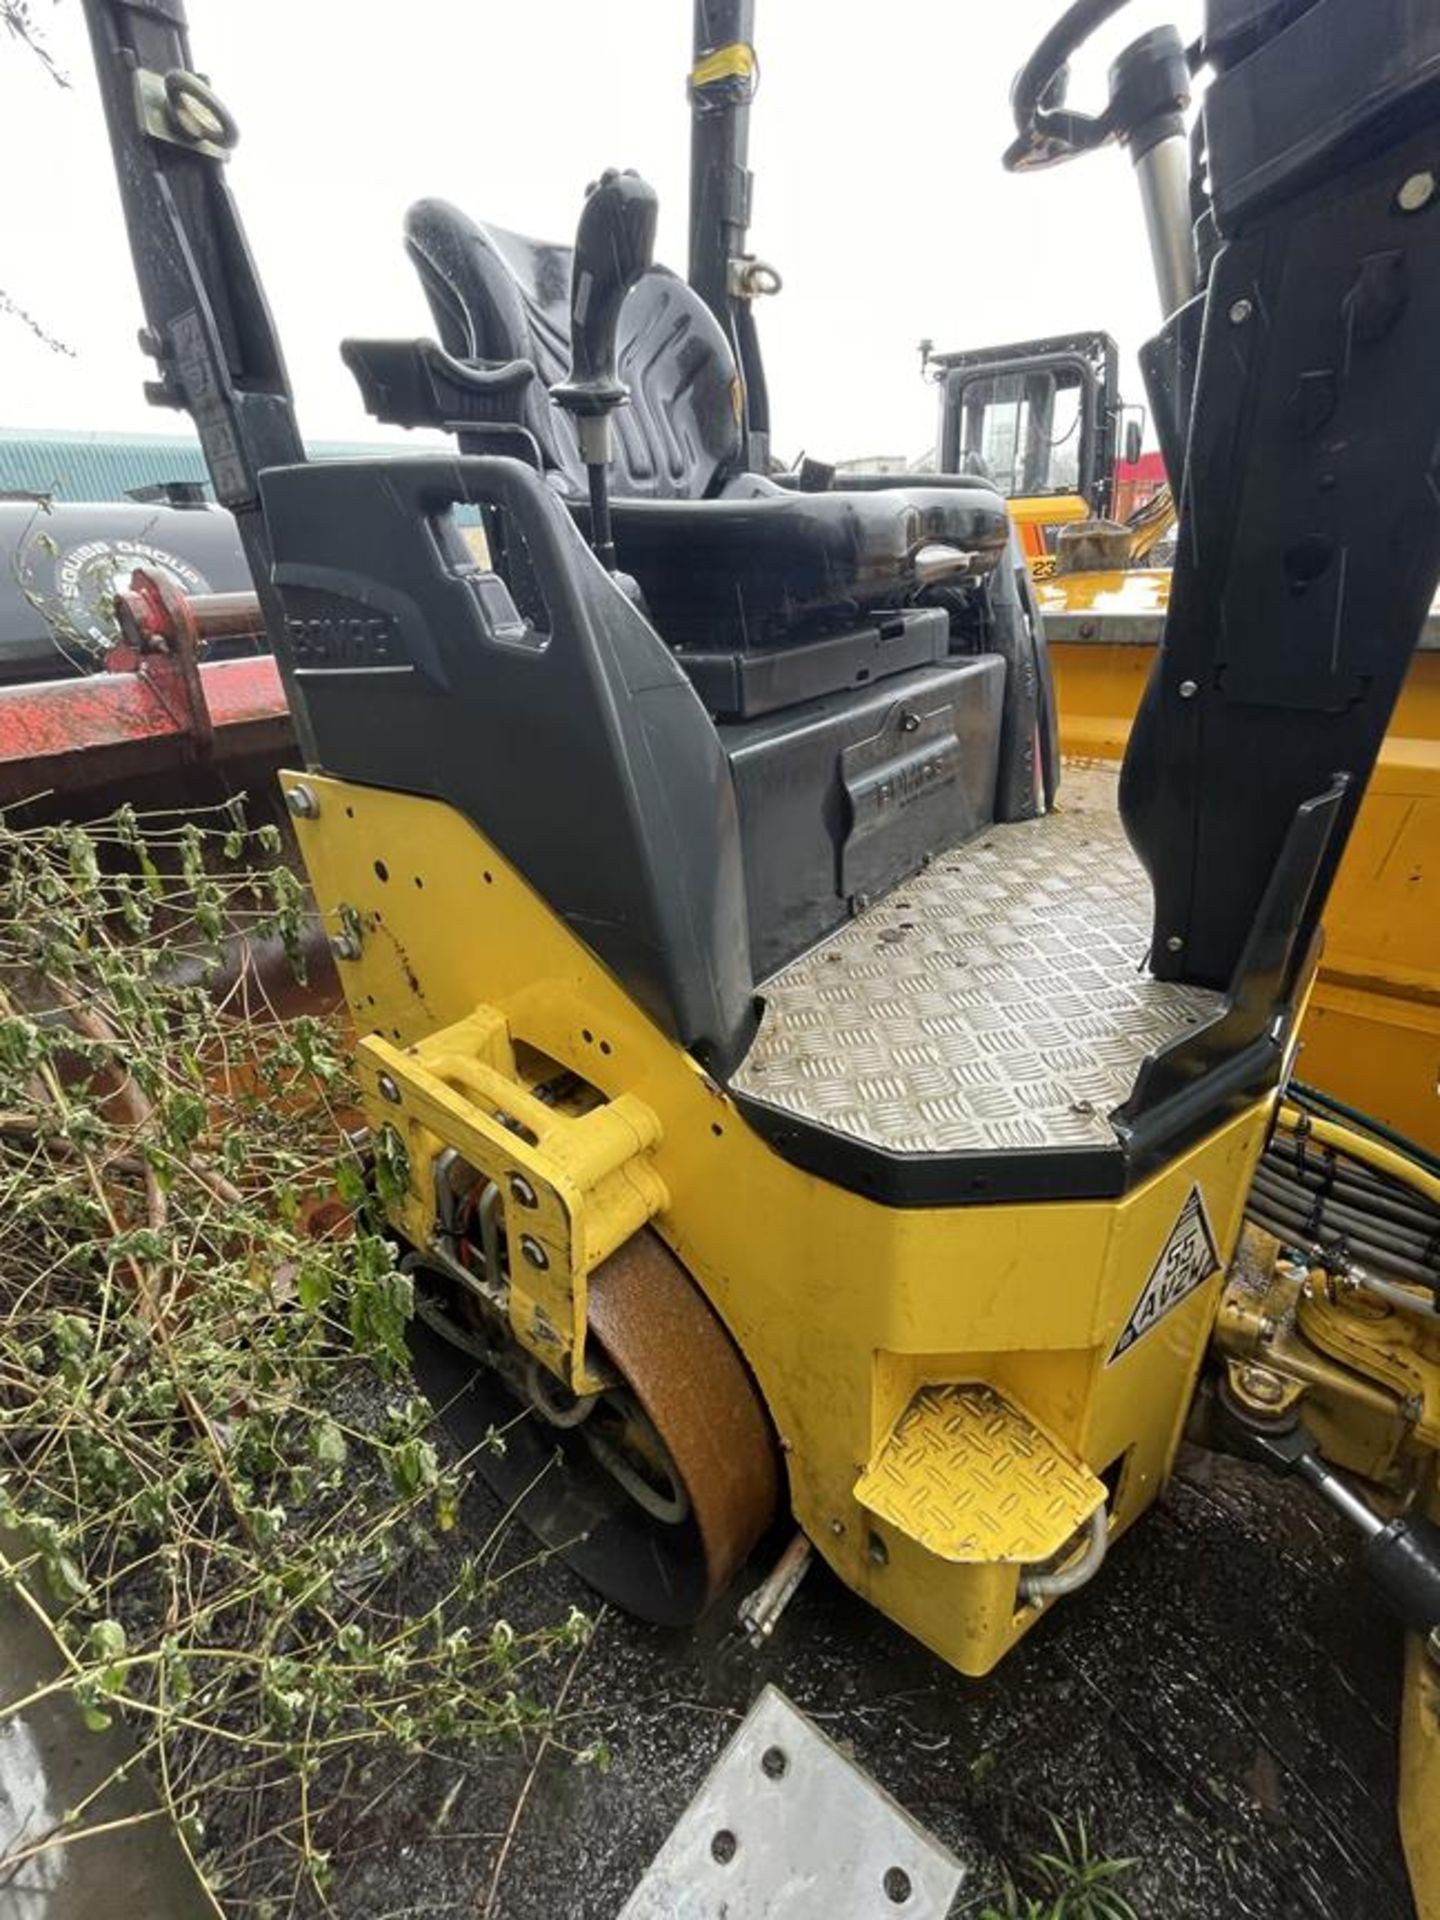 Bomag BW120 AD-5 Tandem Roller, 2700/3500kg Operating Mass S/No. 101880471203 (YOM: 2019) - Image 9 of 9